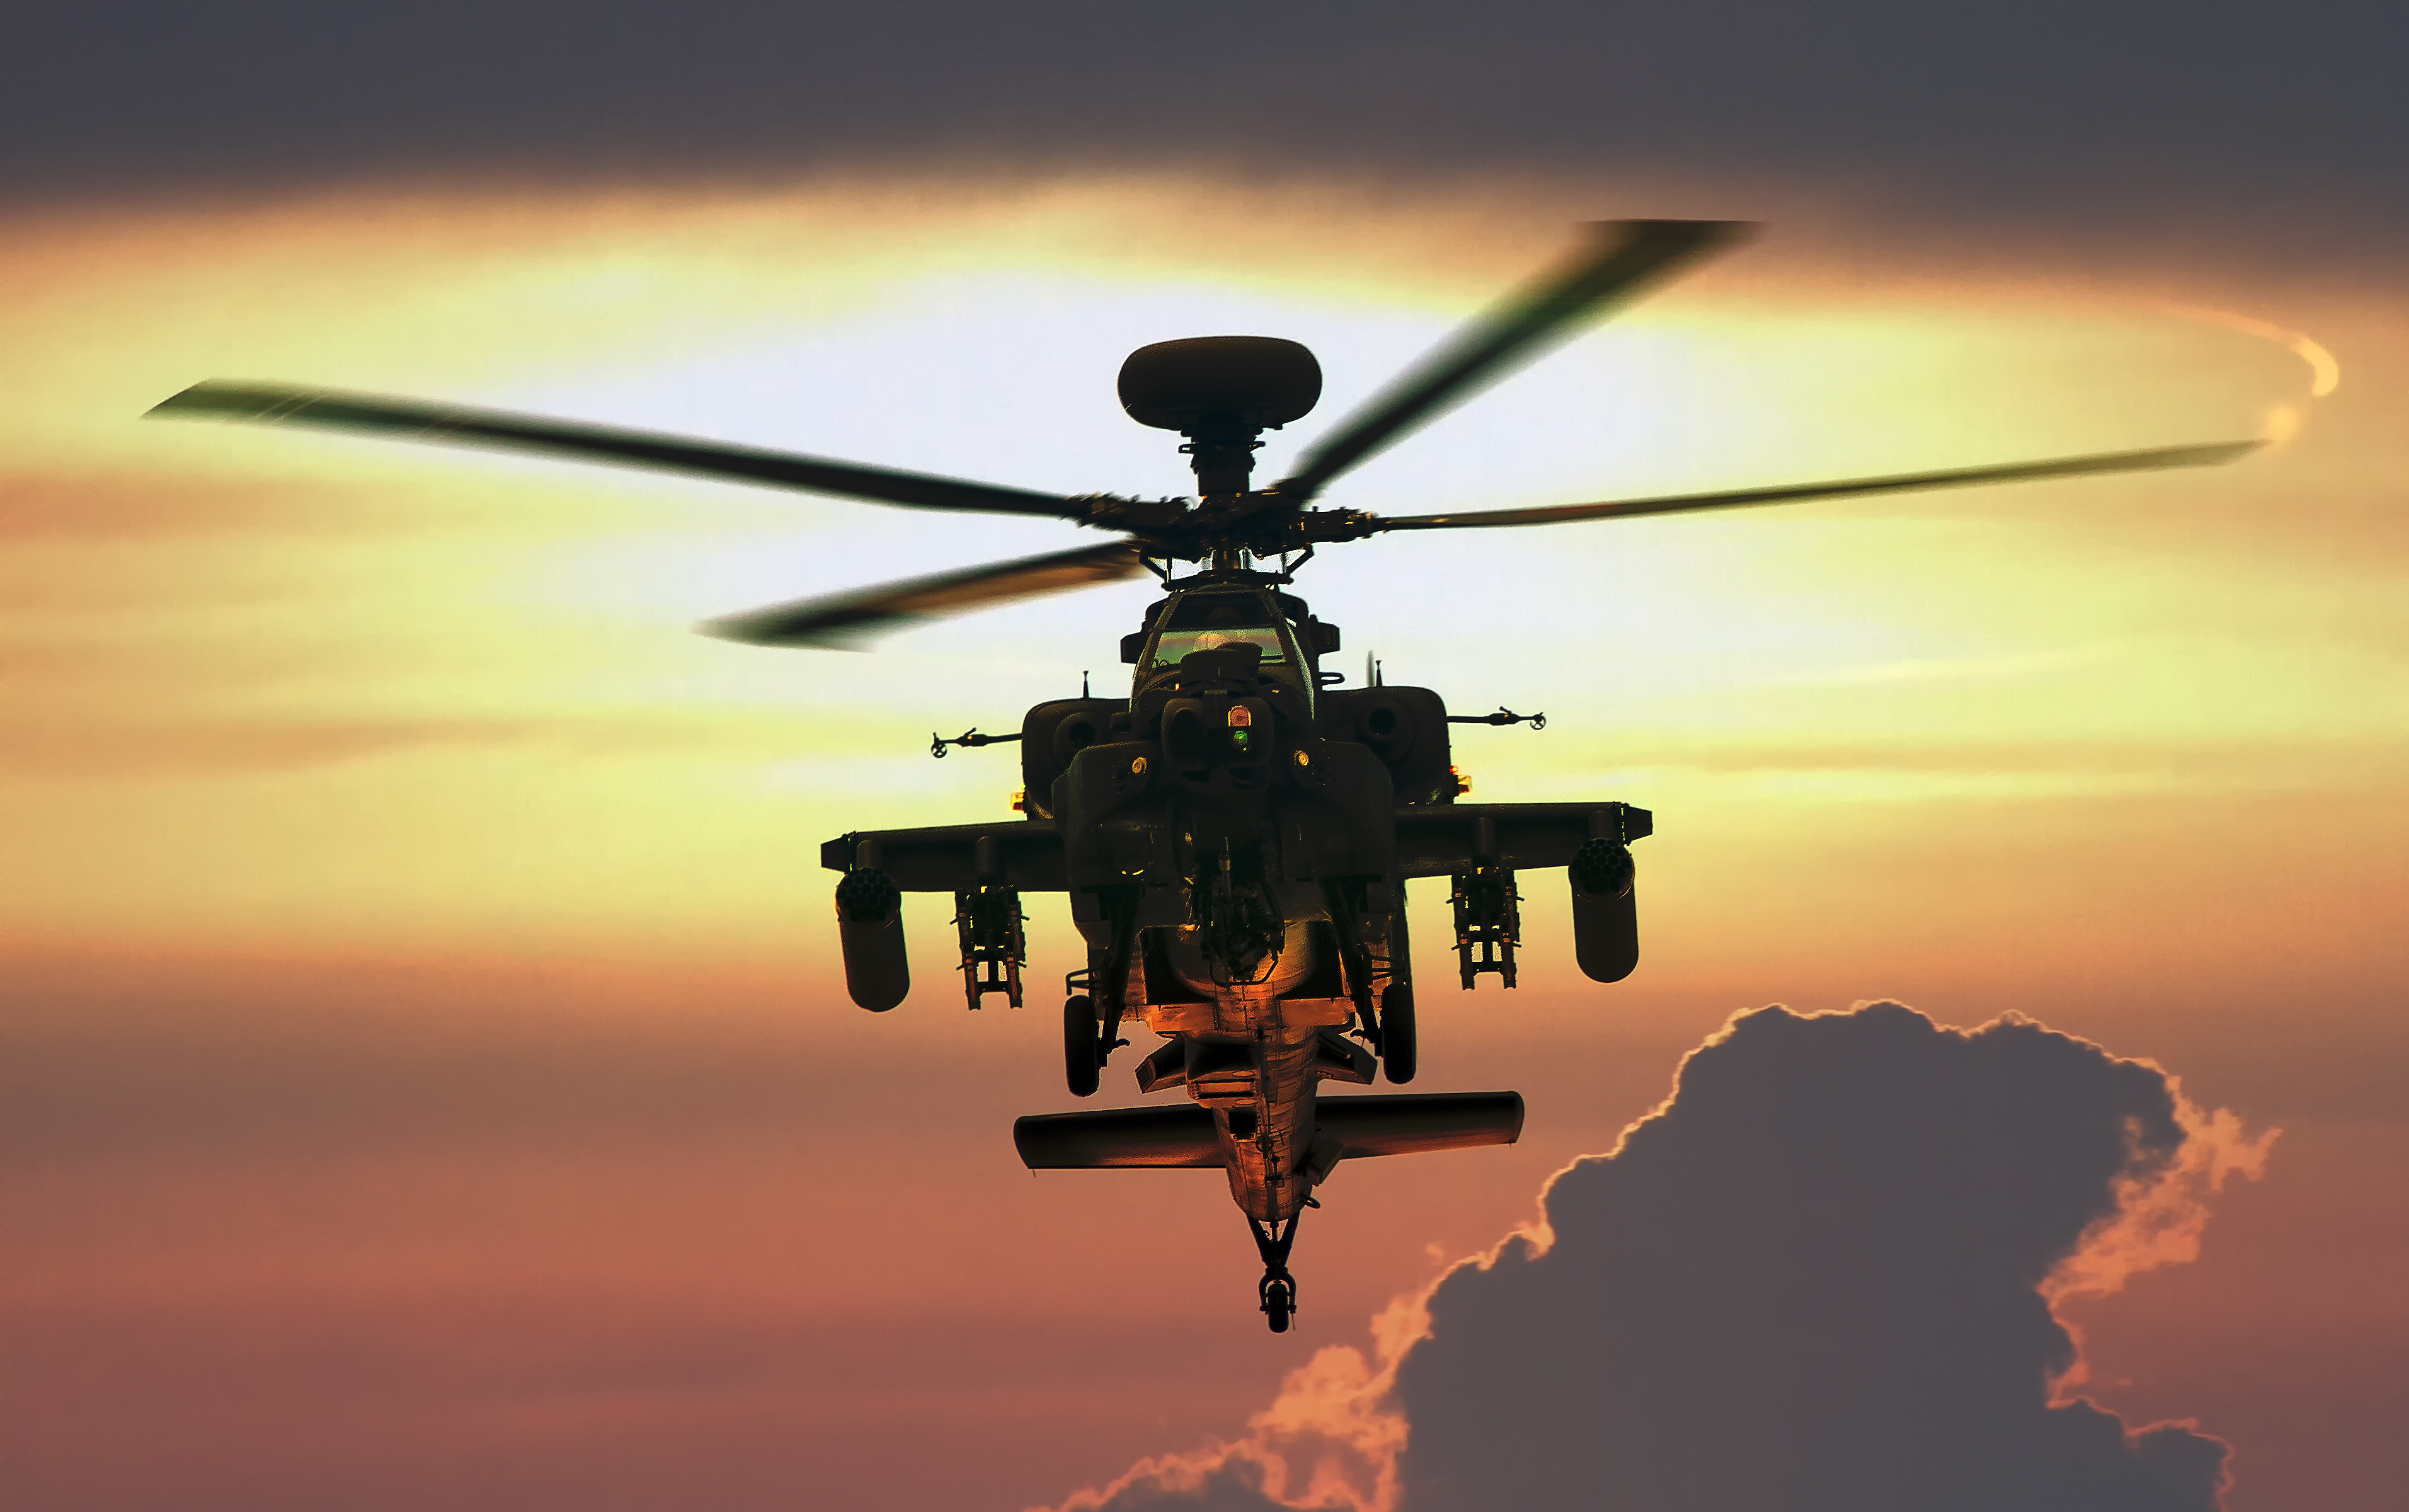 Wallpaper, sunset, vehicle, aircraft, Boeing, combat, air force, Flight, Apache, action, aviation, screenshot, atmosphere of earth, helicopter rotor, rotorcraft, military helicopter, suffolk, westland, mcdonnelldouglas, ah longbow, wah64d, ah64d